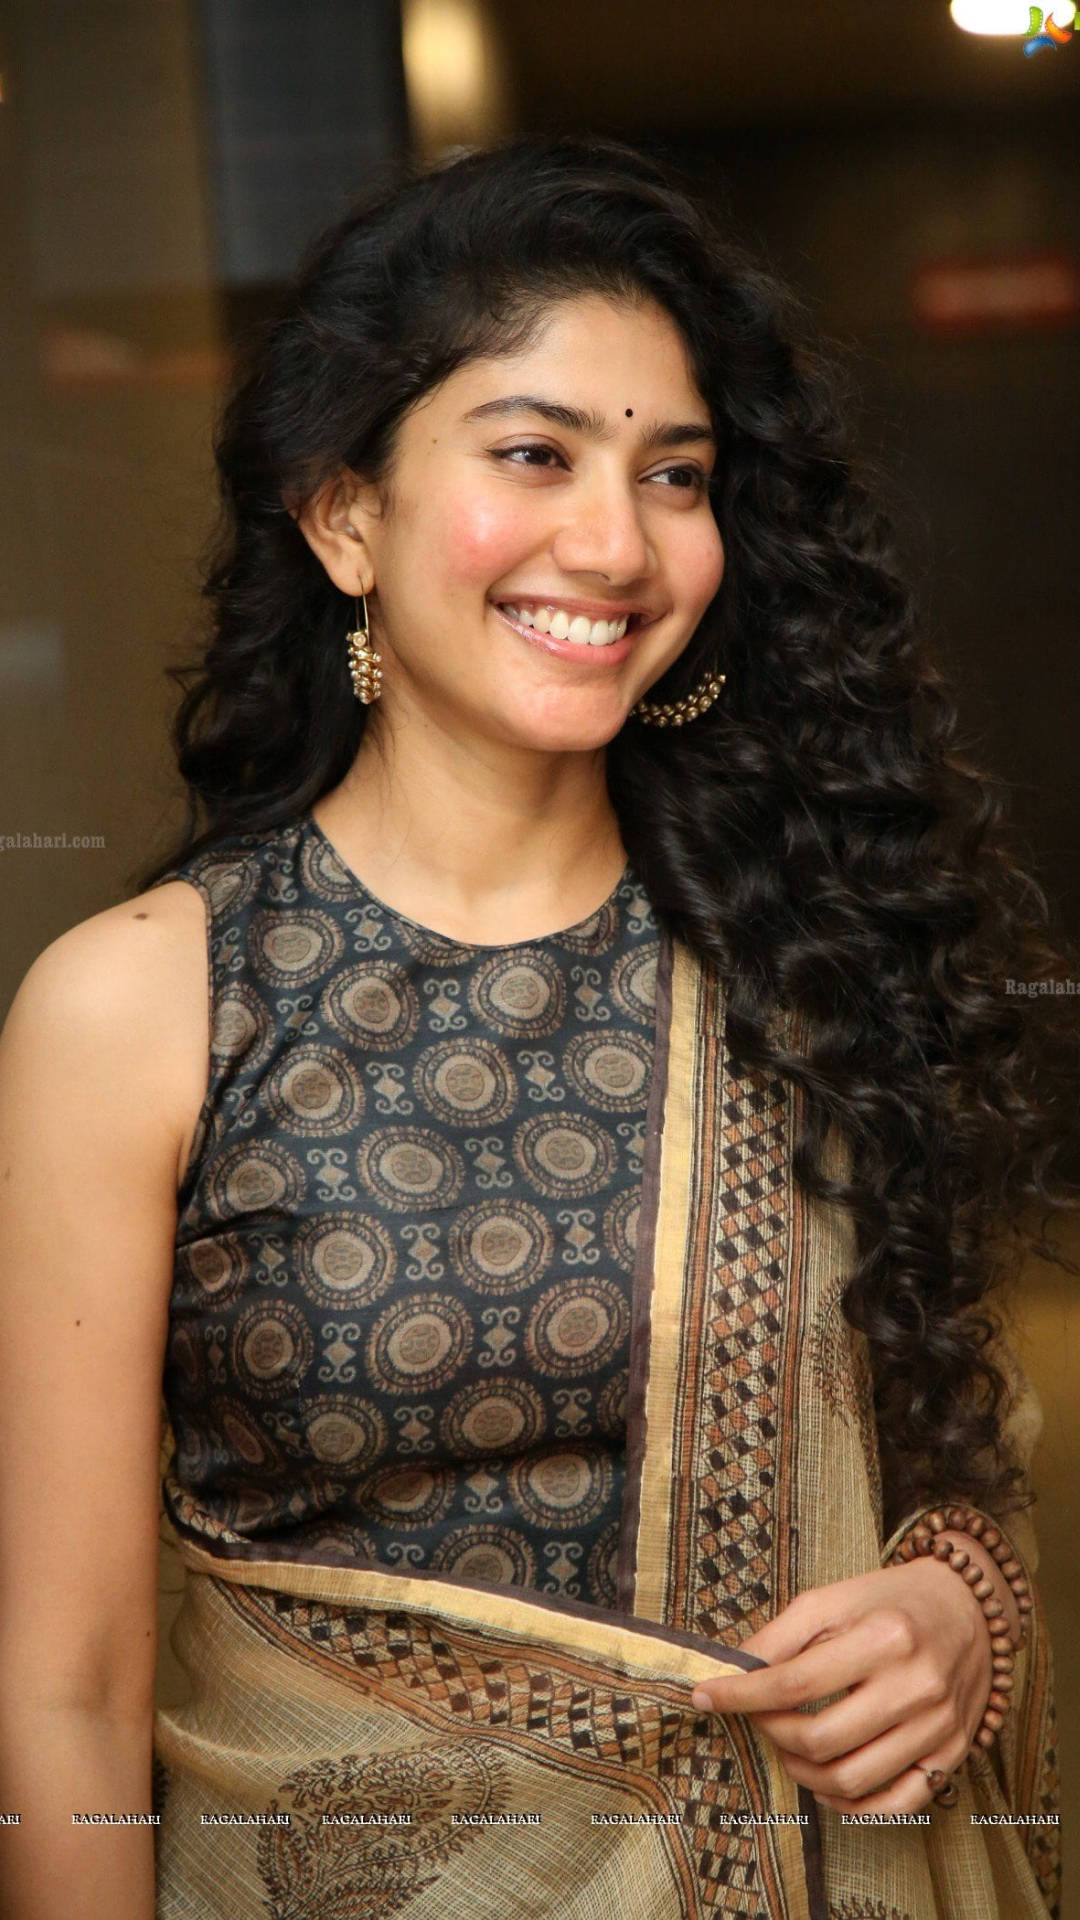 Sai Pallavi reveals the secret behind her long and curly hair